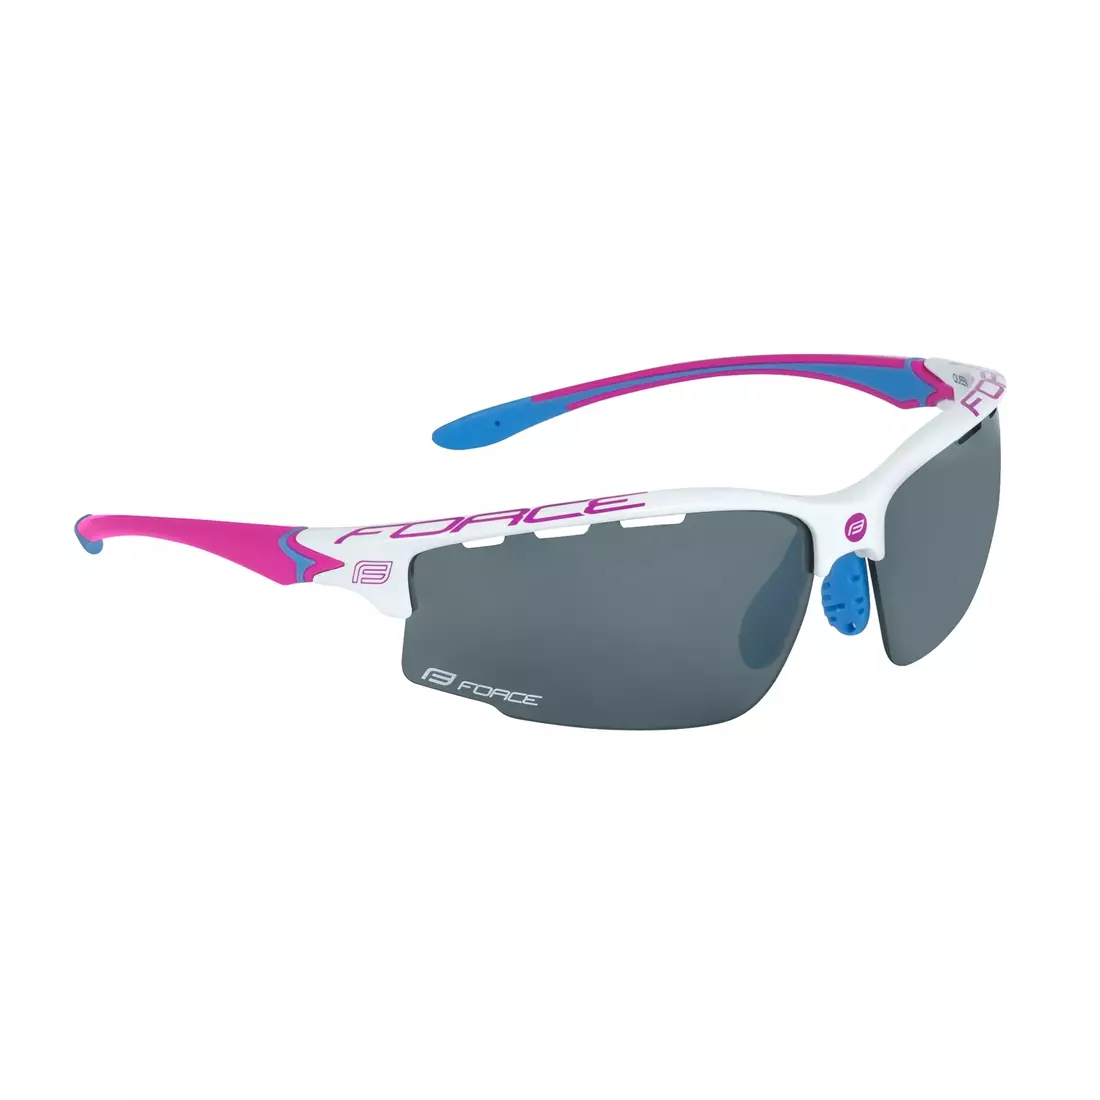 FORCE QUEEN Women's sports glasses with interchangeable lenses, white and pink